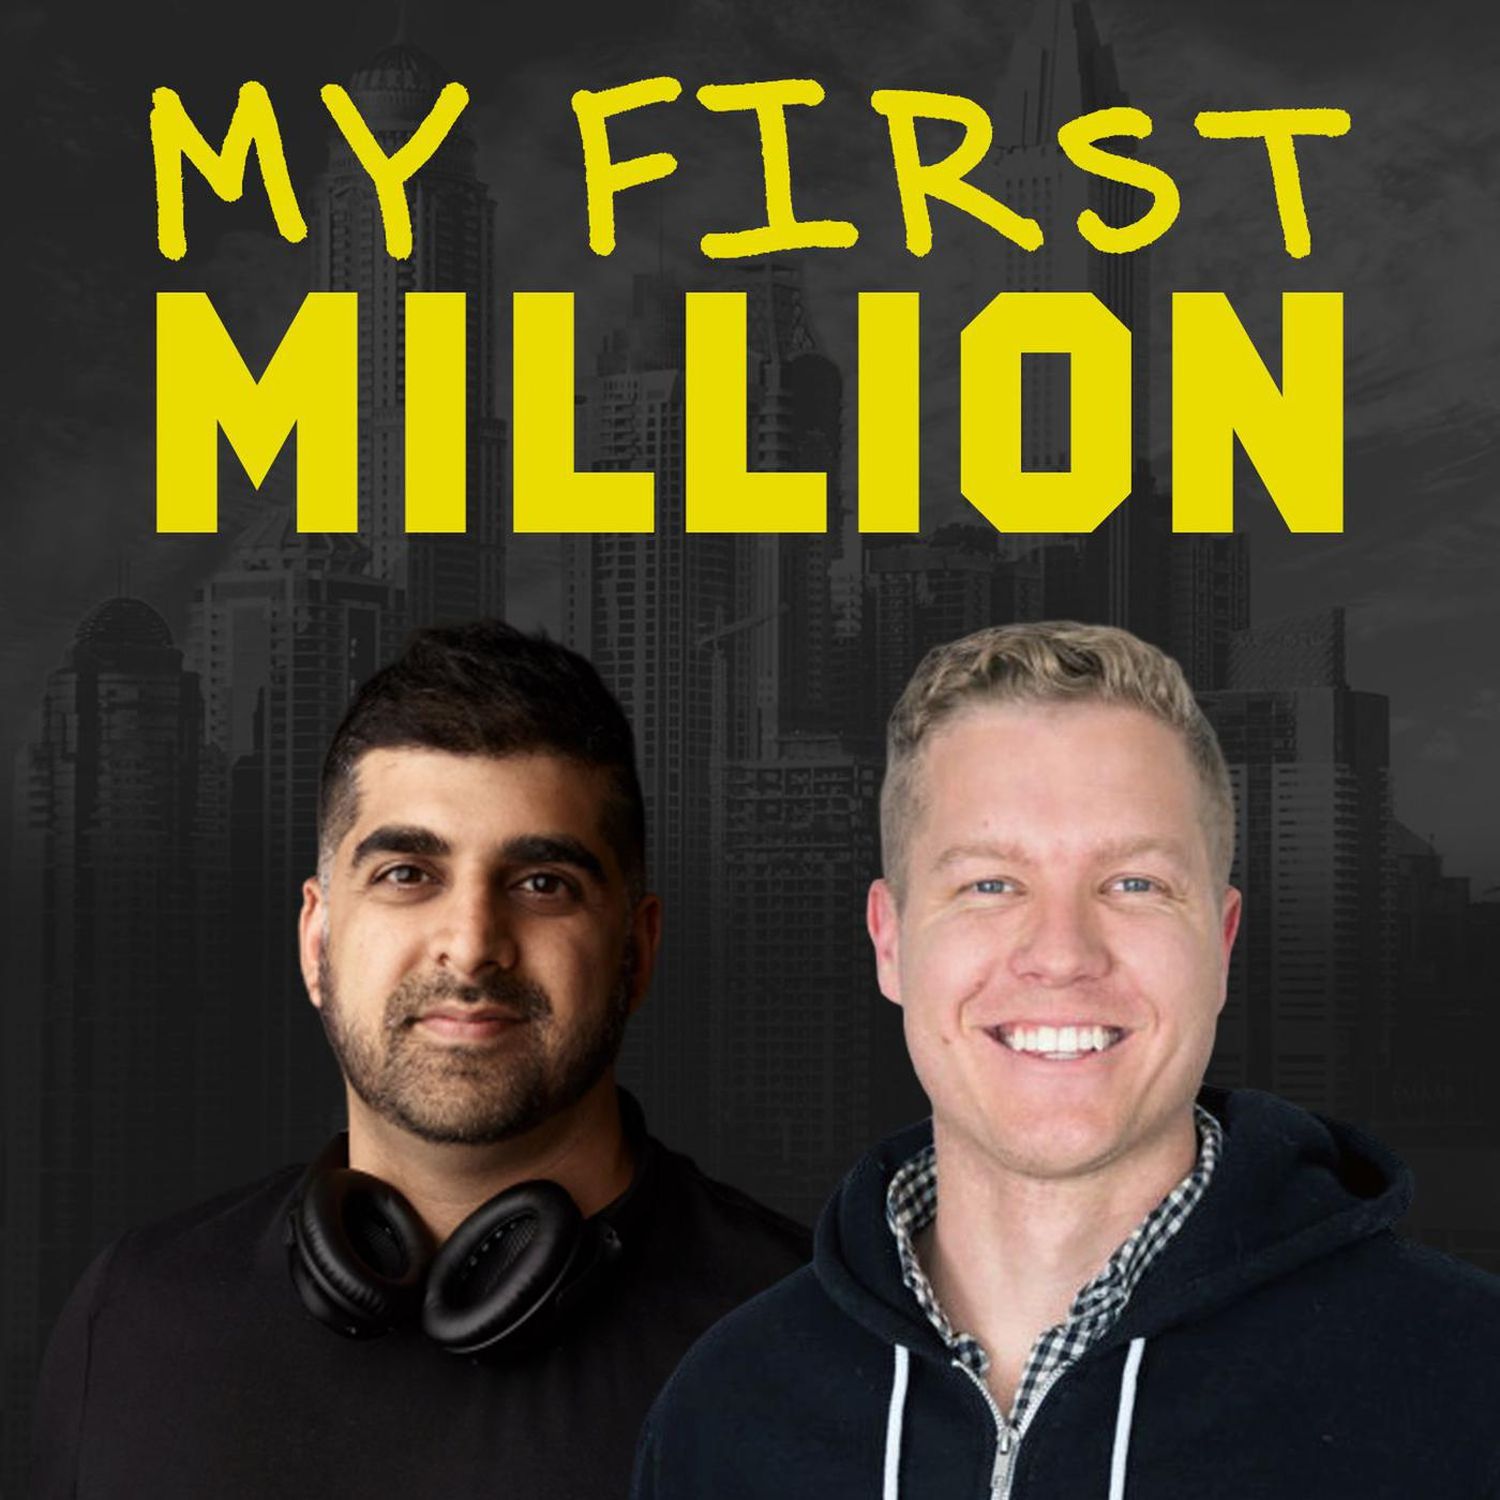 Hire 1 to Hire 10, Sam Gets Hacked, Shaan Buys a $200K NFT, and More with Andrew Wilkinson